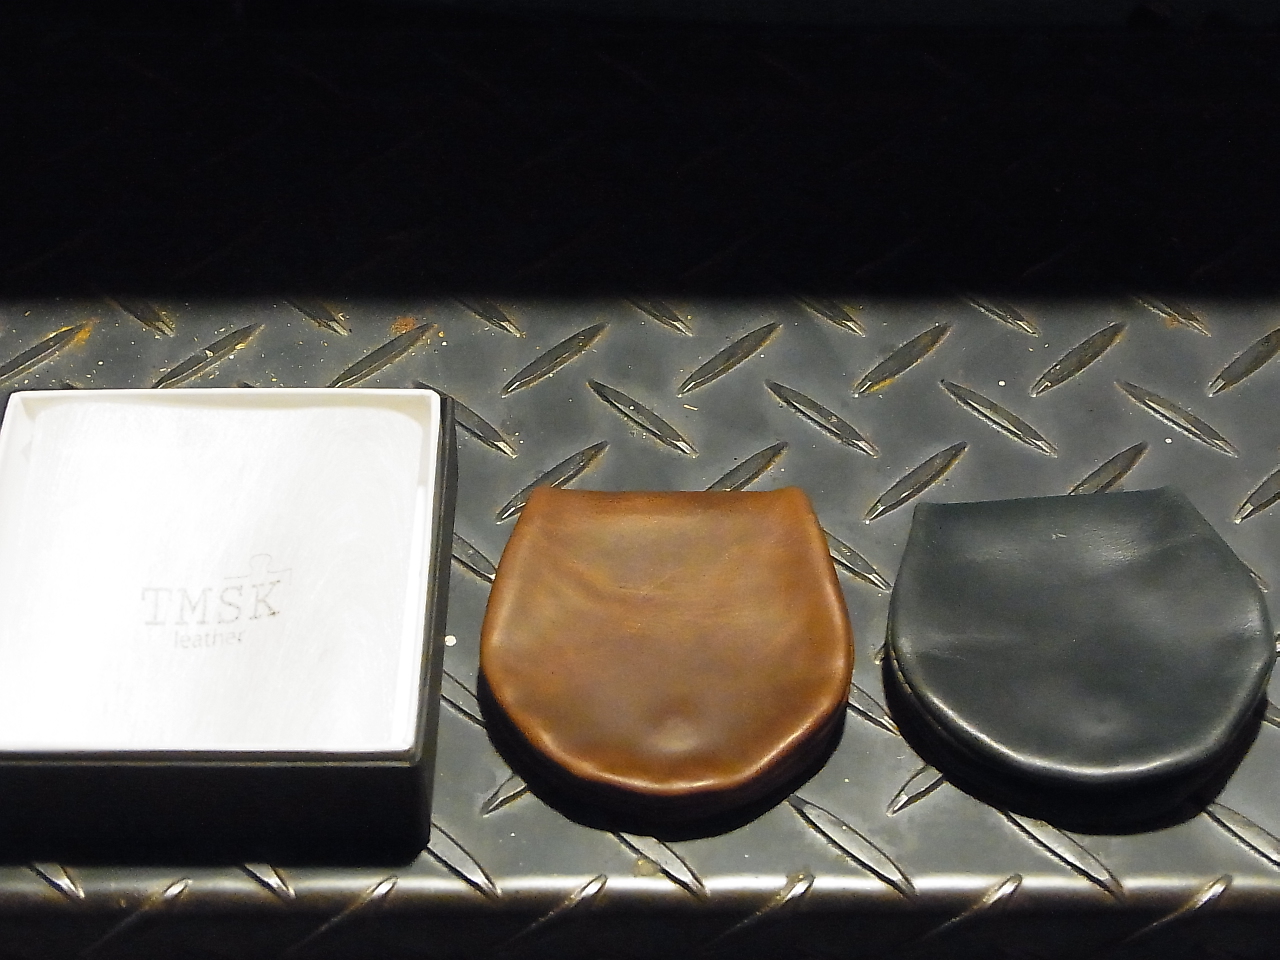 tmsk-leather-coincase-20151118-3